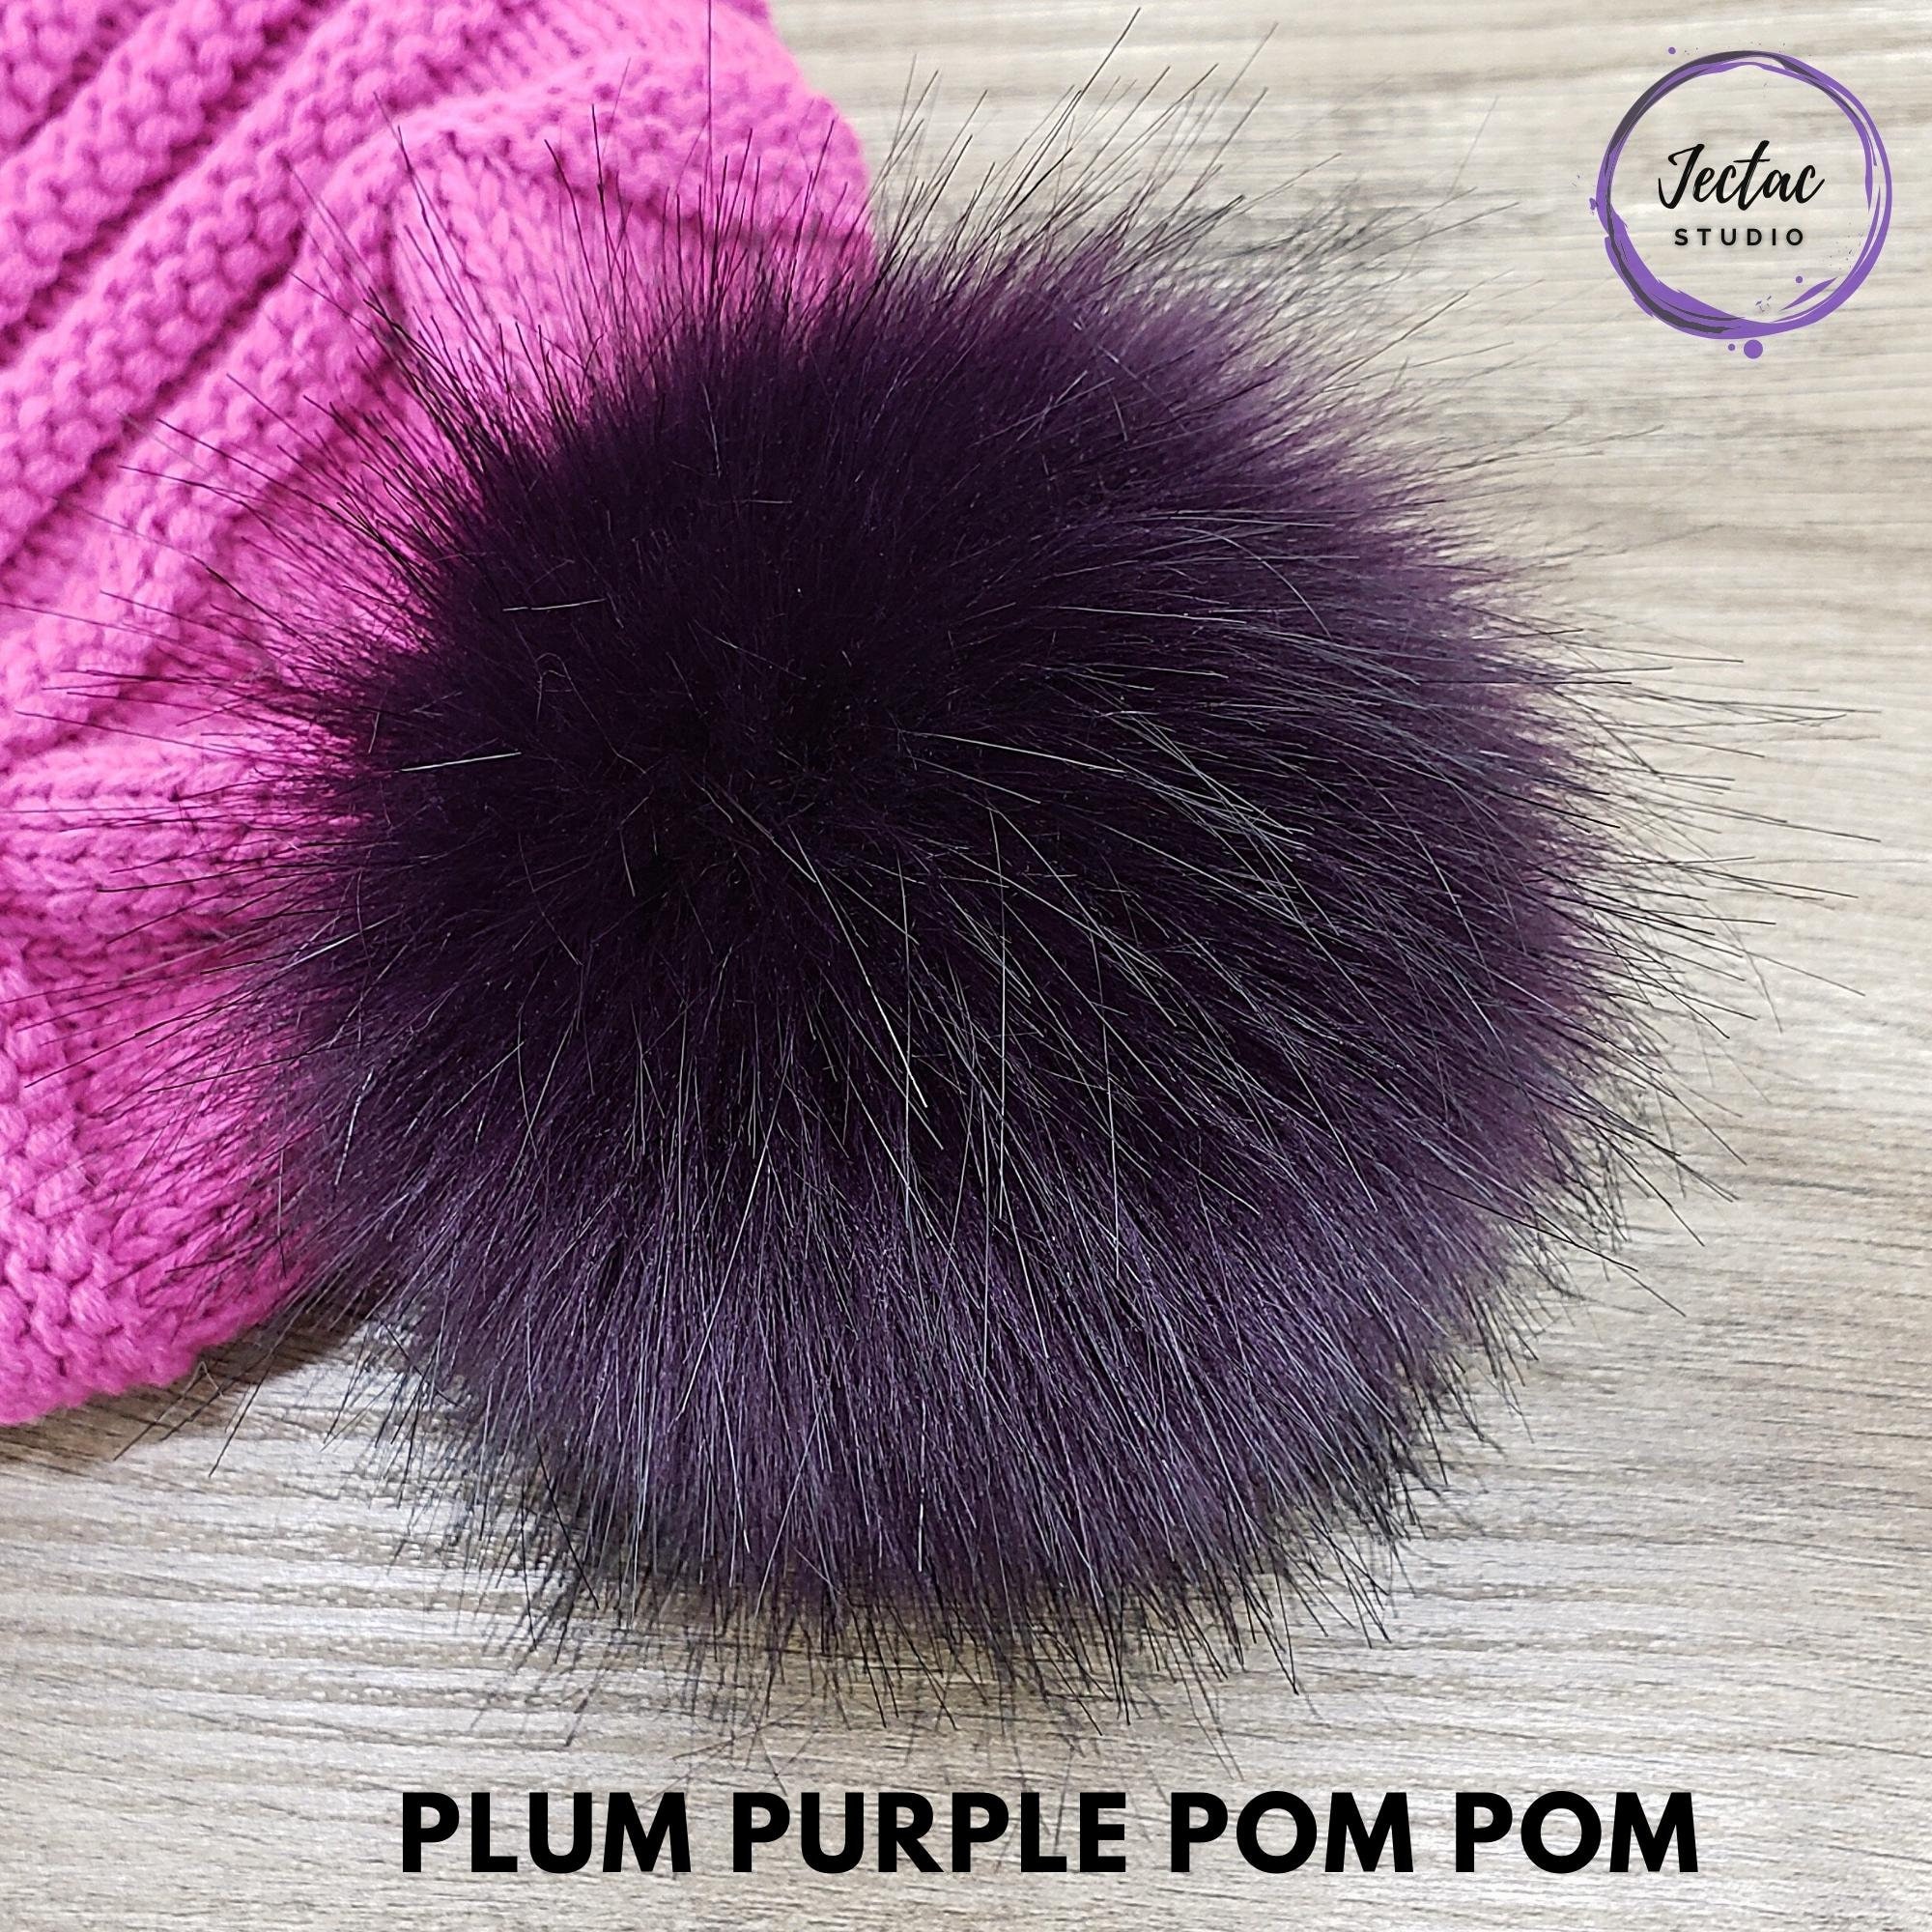 26 Pcs Faux Fur Pom Poms for Hats - 3.2 Inch Fluffy Pom Poms with Elastic  Loop for DIY Crafts, Removable Knitting Accessories for Keychains Shoes